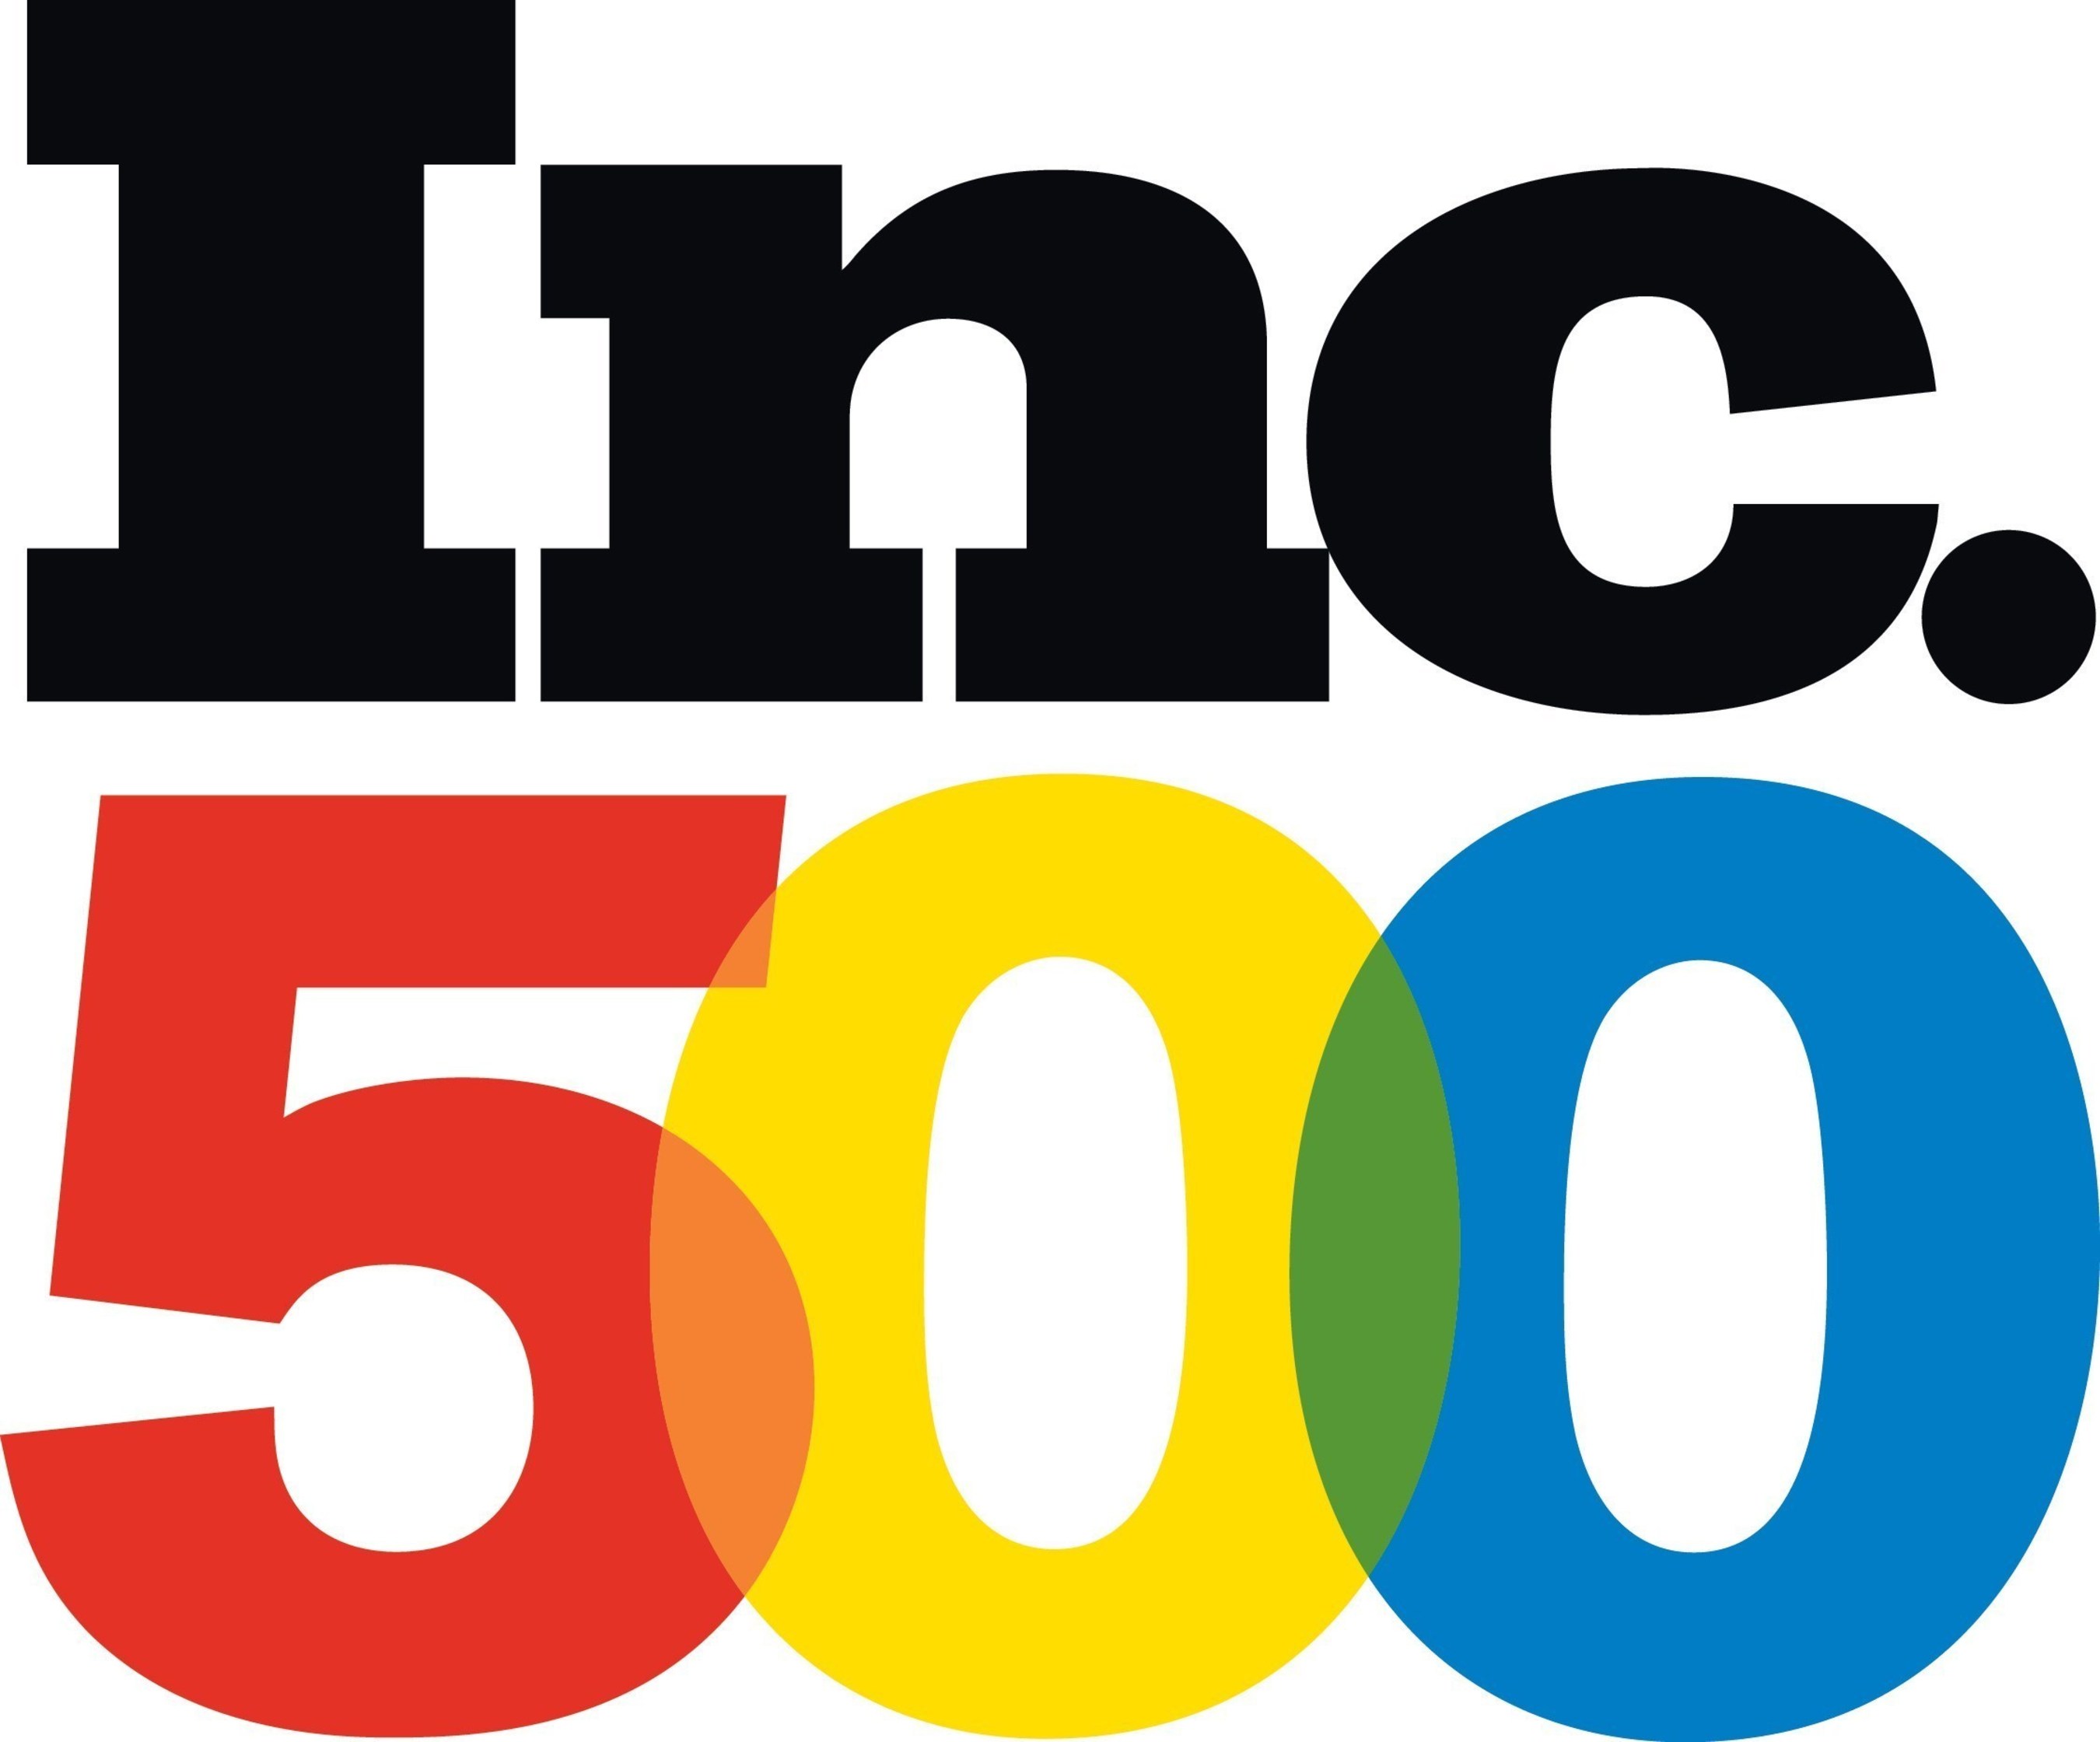 Microsoft Partner Cireson Achieves Top Inc. 5000 Placement, as 167th Fastest Growing Company in U.S.